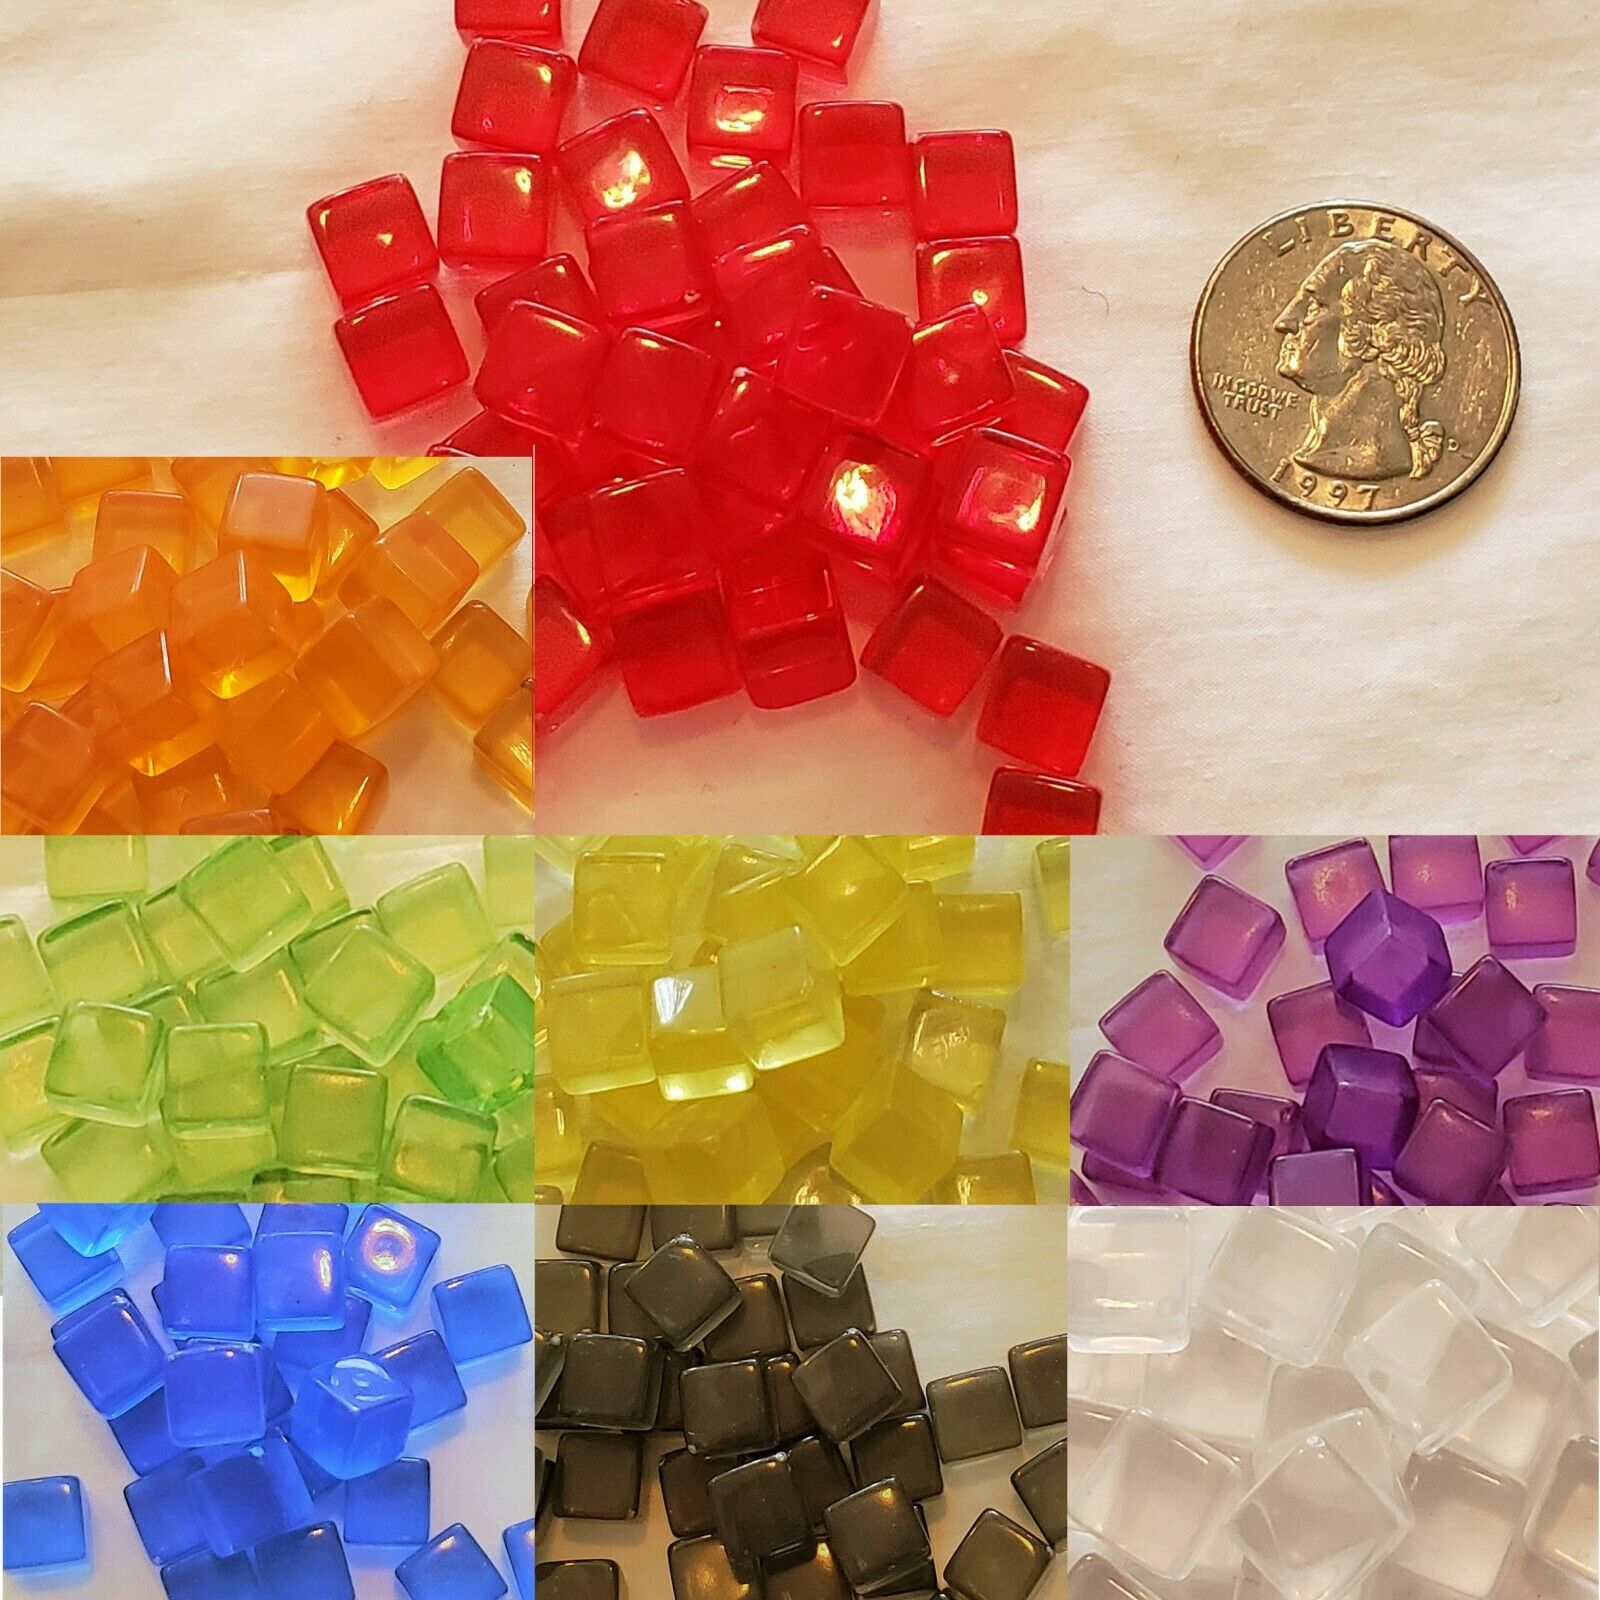 Board Game Cubes 8mm - Plastic Tokens - Euro Meeple Pieces - $3 Ships All